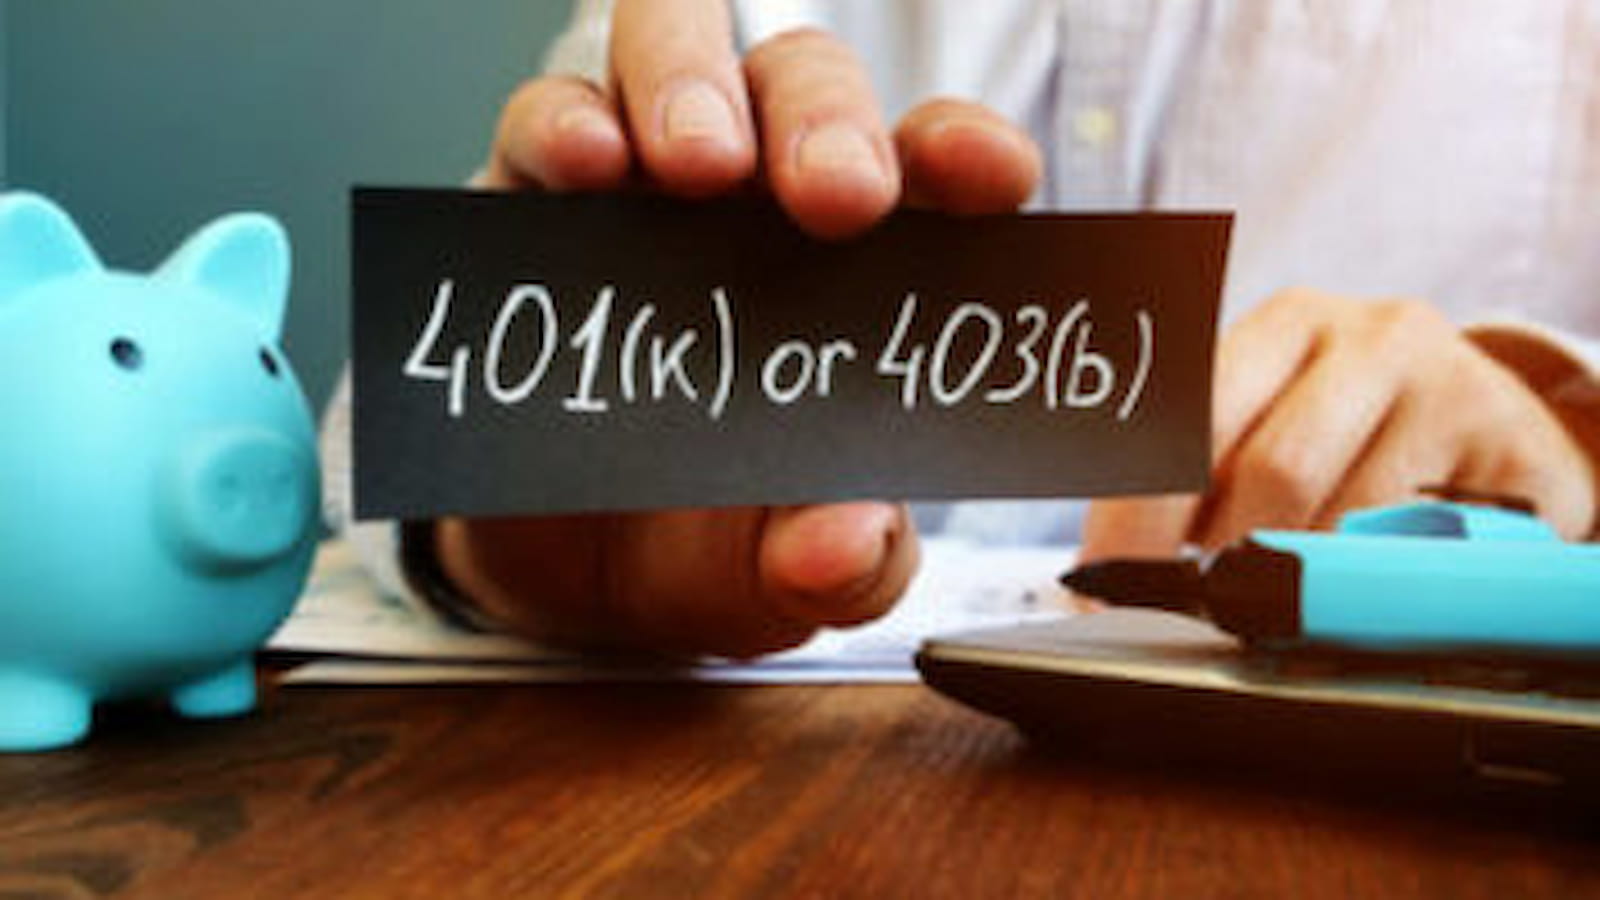 403b Vs. 401k What is the Difference?